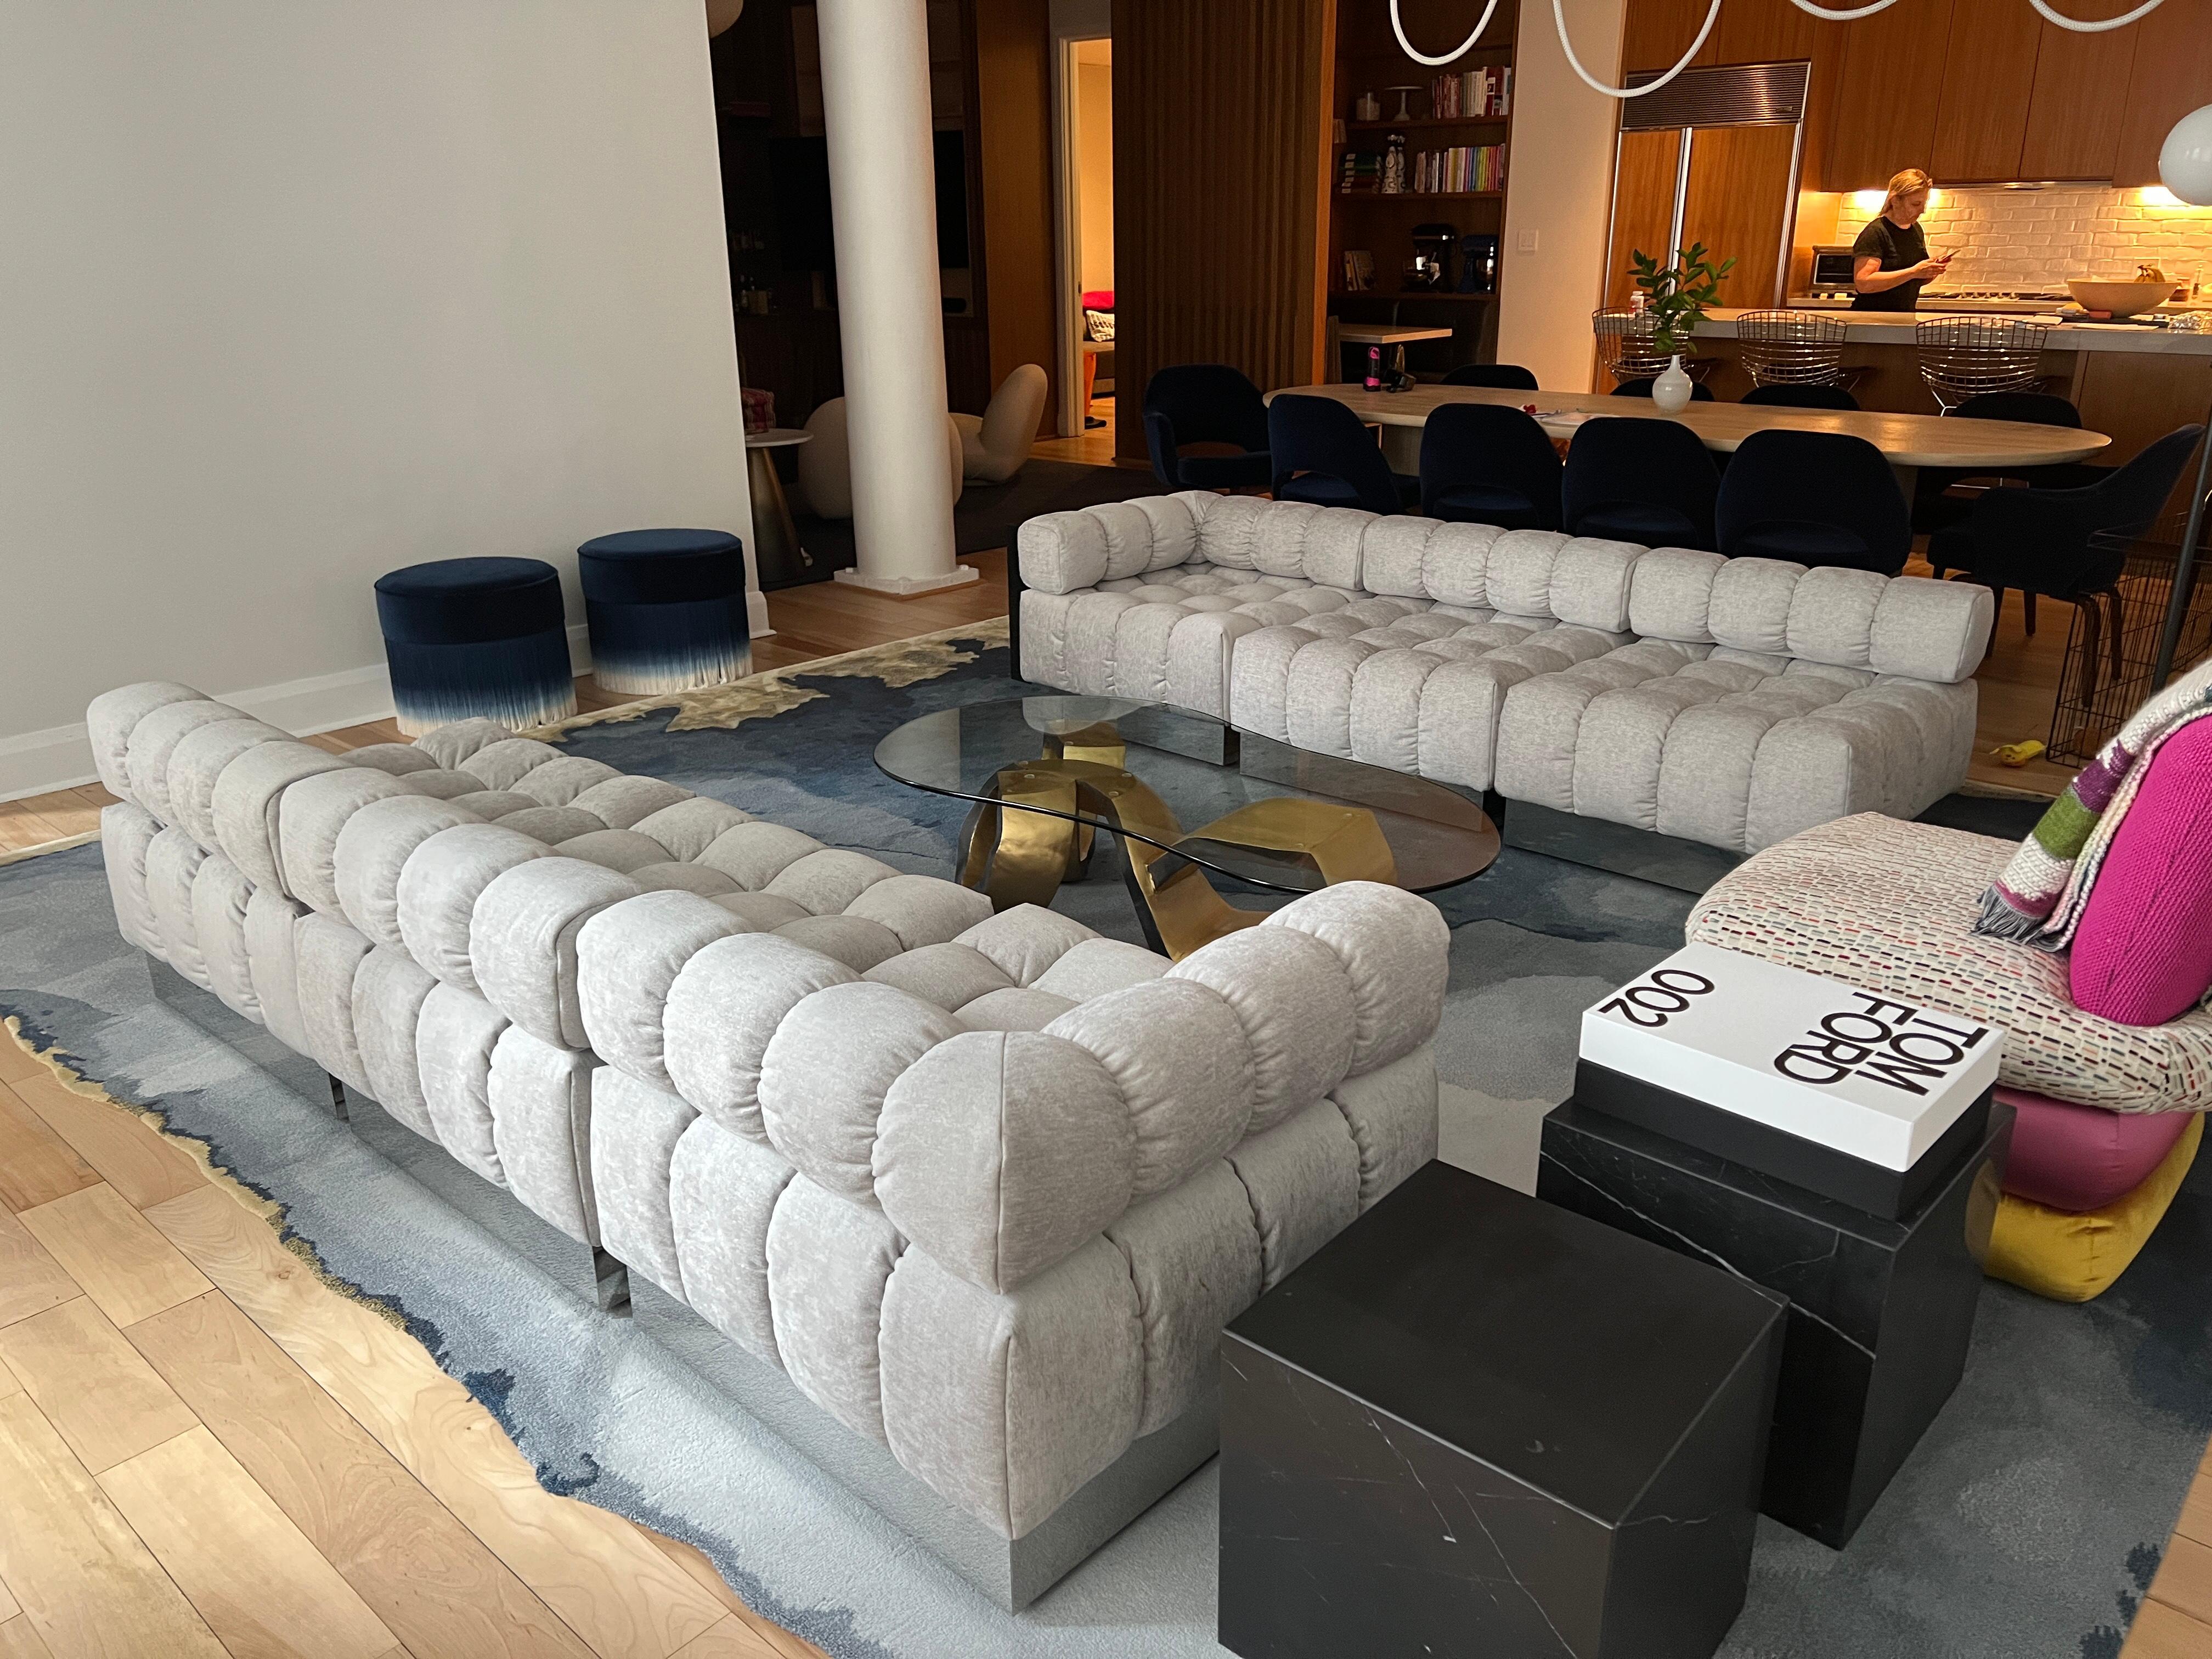 Harvey Probber deep tuft designed in 1972.
SIZE ADVERTISED FOR EACH INDIVIDUAL MODULE
4 armless modules
2 arms modules
UPHOLSTERED IN Pollack Geneva 4206/02 Smoke
M2L is the exclusive licensee to produce and distribute Harvey Probber designs.